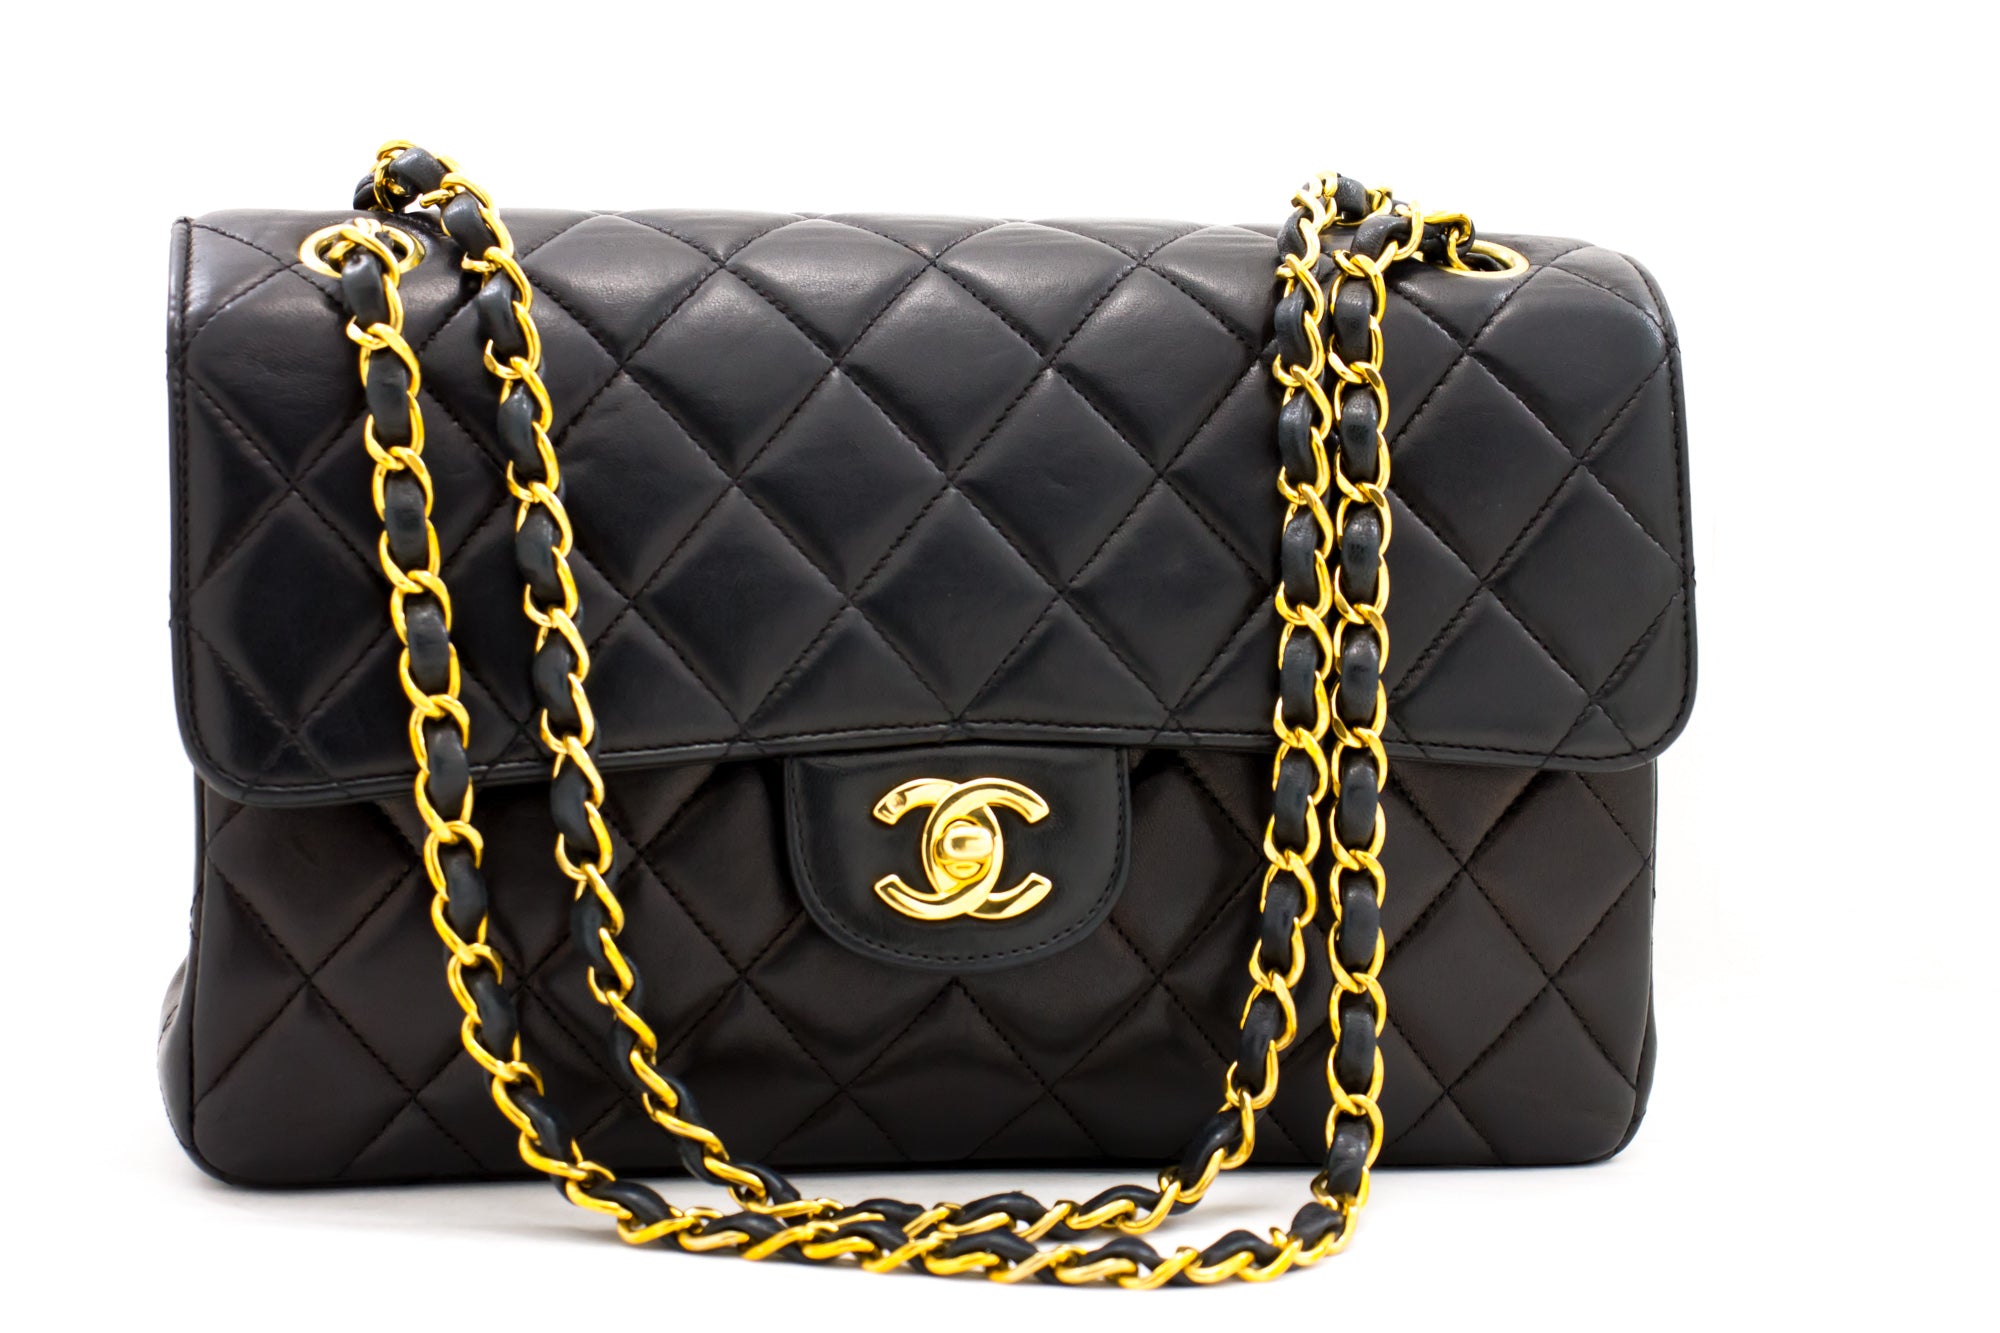 Chanel Chanel Black Quilted Leather 2.55 10 Shoulder Bag Gold Chain